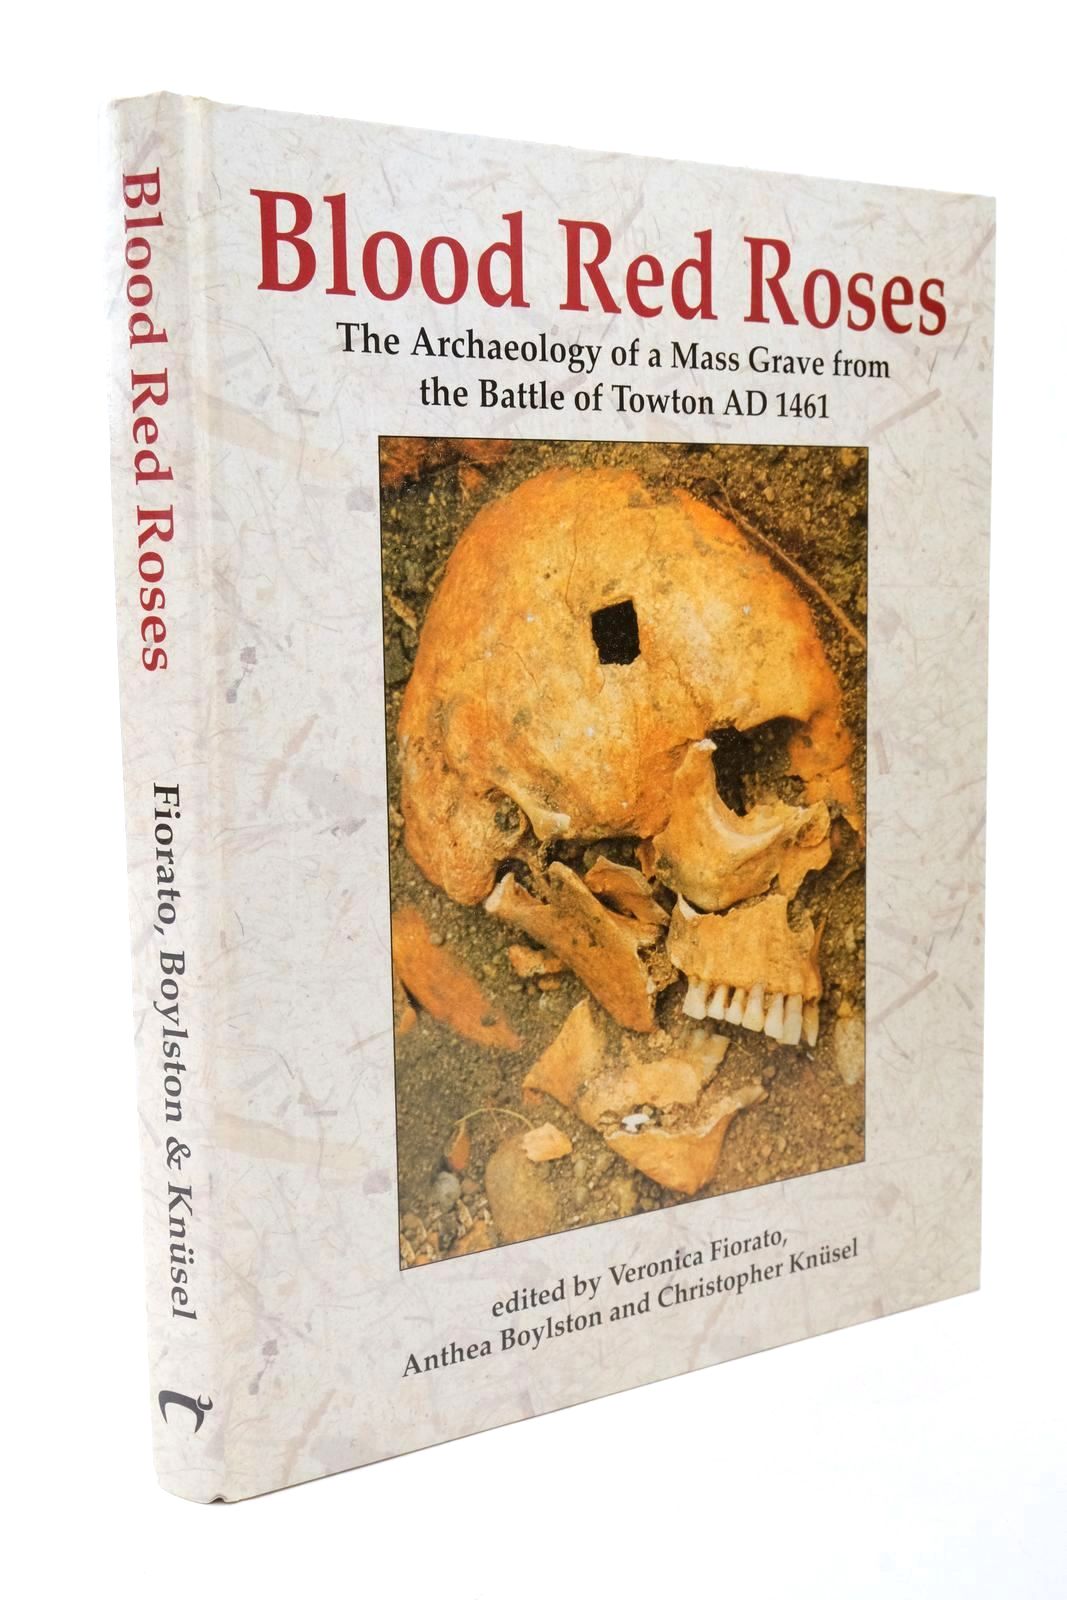 Photo of BLOOD RED ROSES written by Fiorato, Veronica Boylston, Anthea Knusel, Christopher published by Oxbow (STOCK CODE: 1322589)  for sale by Stella & Rose's Books